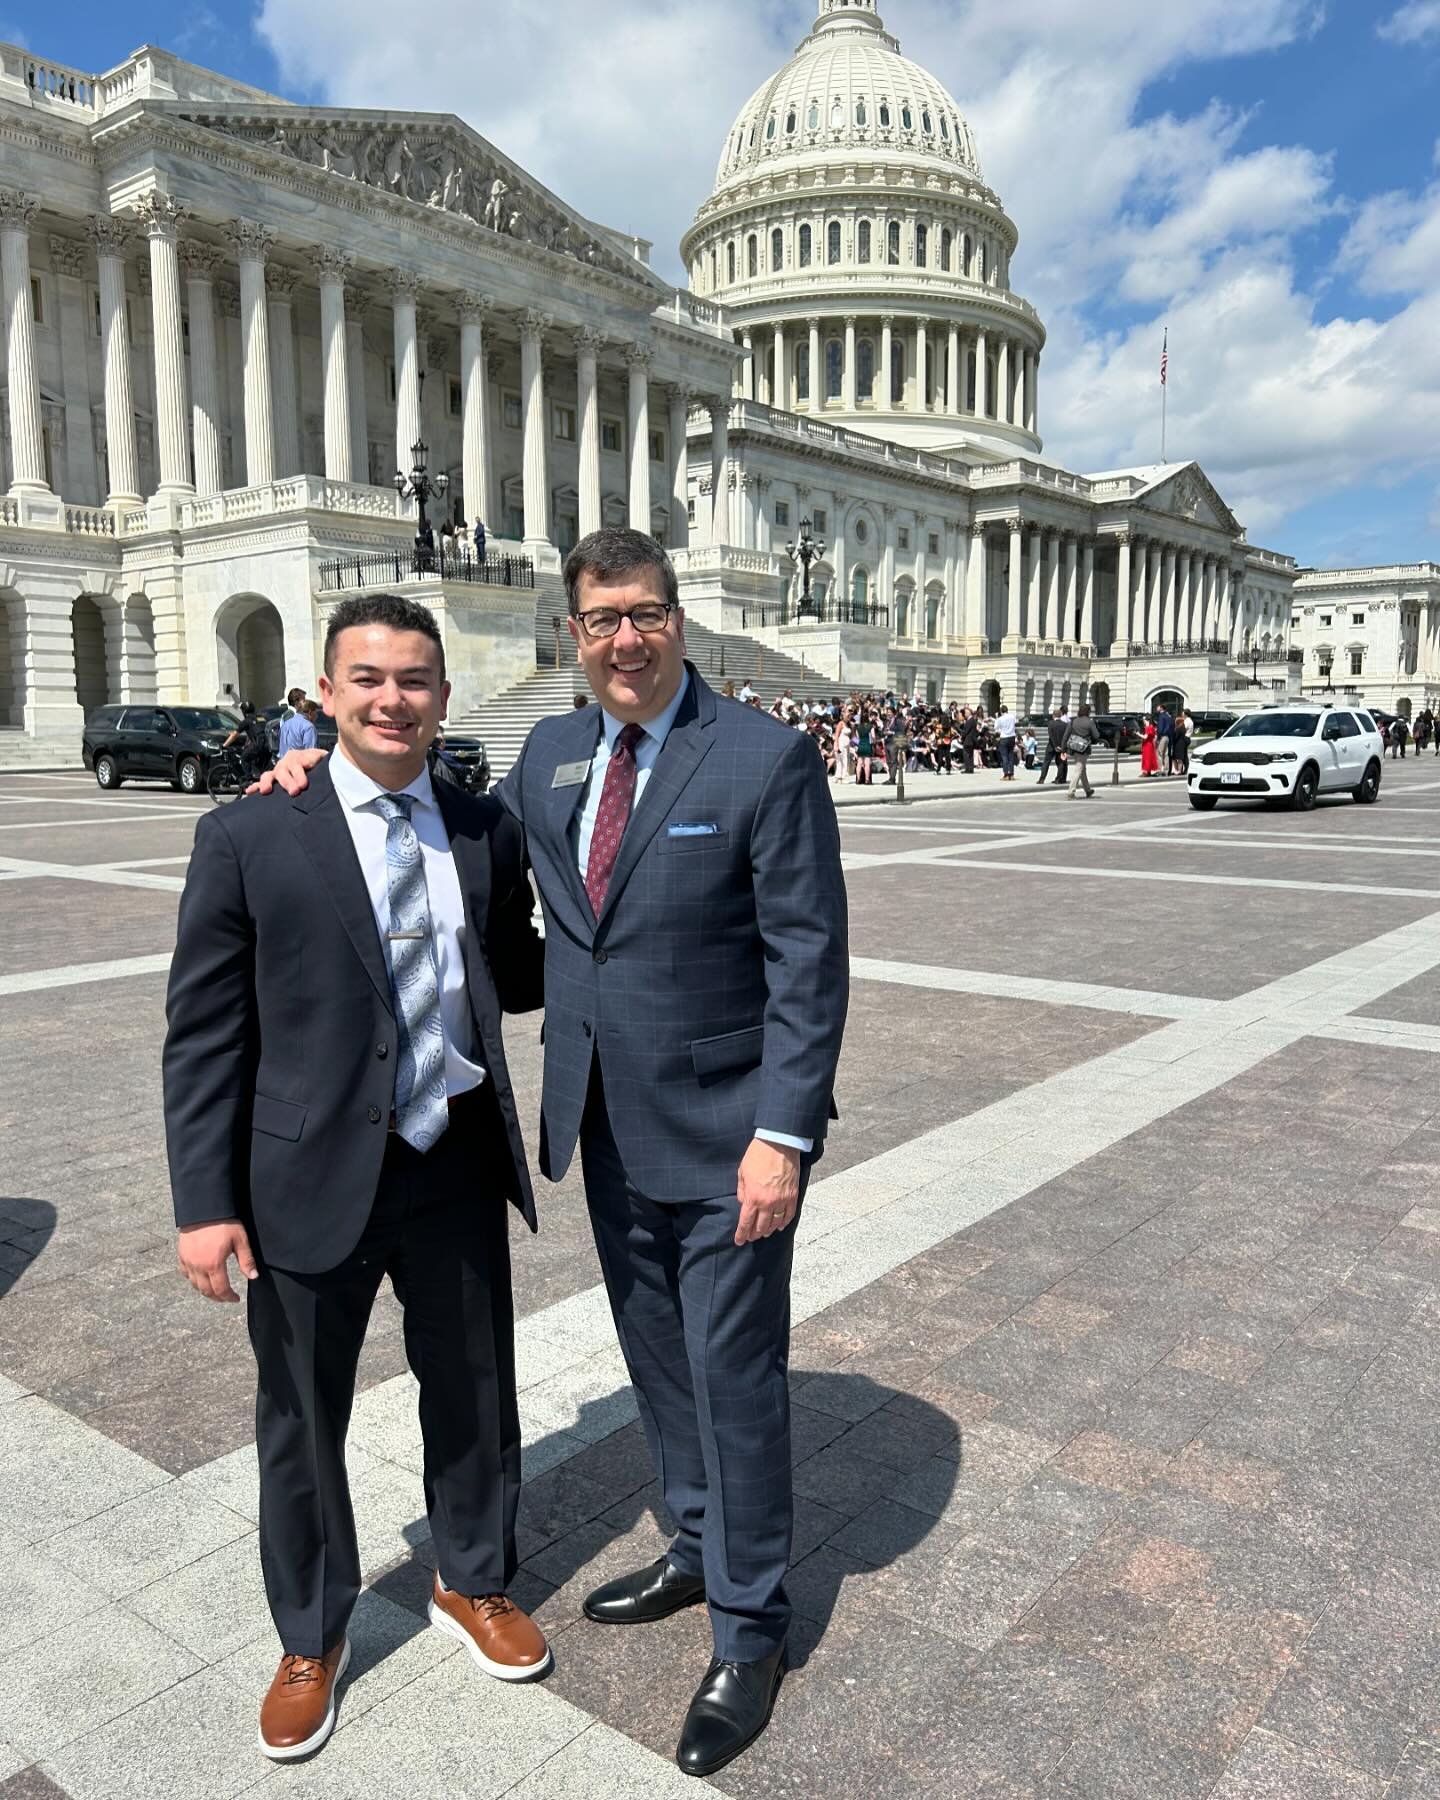 Earlier this month, Sean Hoffmans (Fall &lsquo;21) and Immediate Past International President and Alpha Omega Alumni Mike Riley (1984 Initiate) had the opportunity to represent the Pi Kappa Alpha International Fraternity on Capitol Hill in Washington